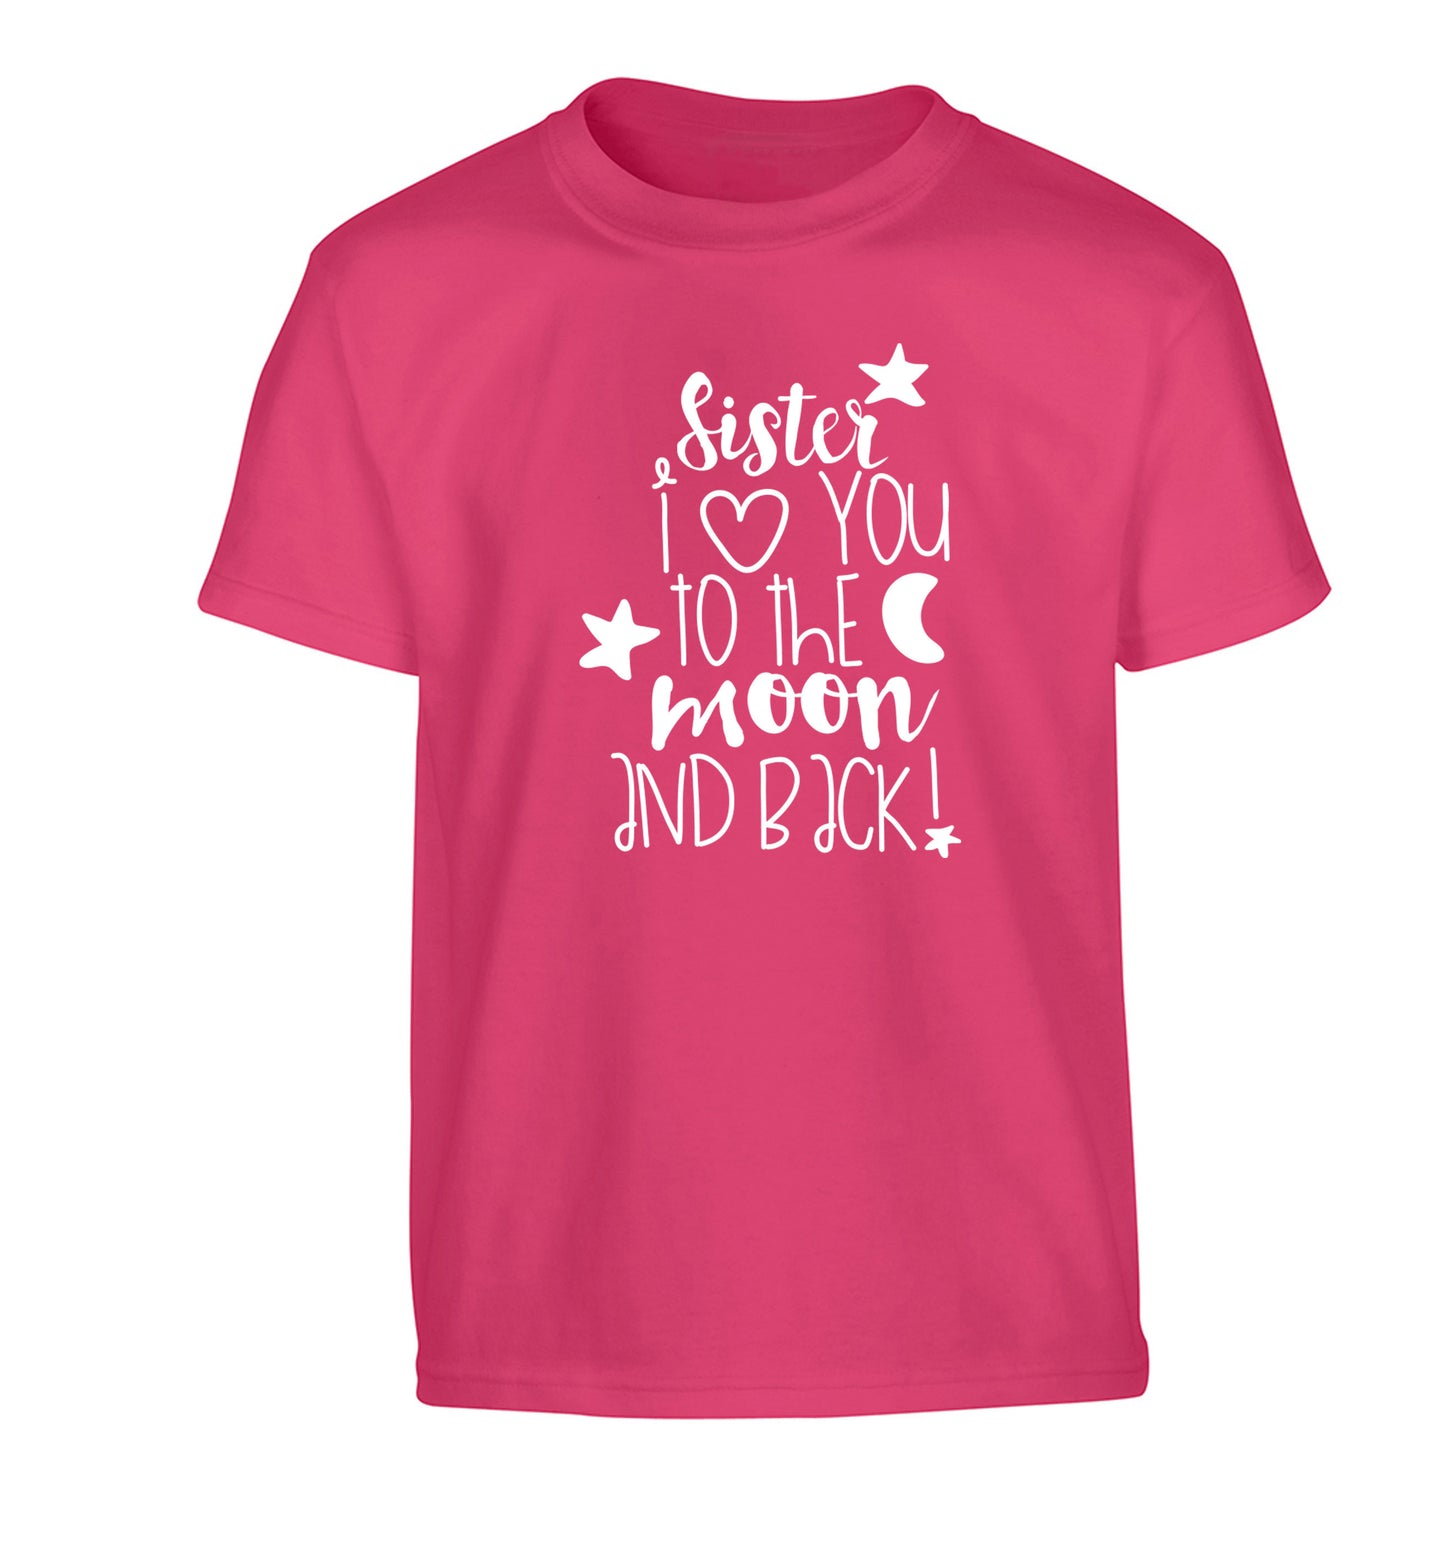 Sister I love you to the moon and back Children's pink Tshirt 12-14 Years